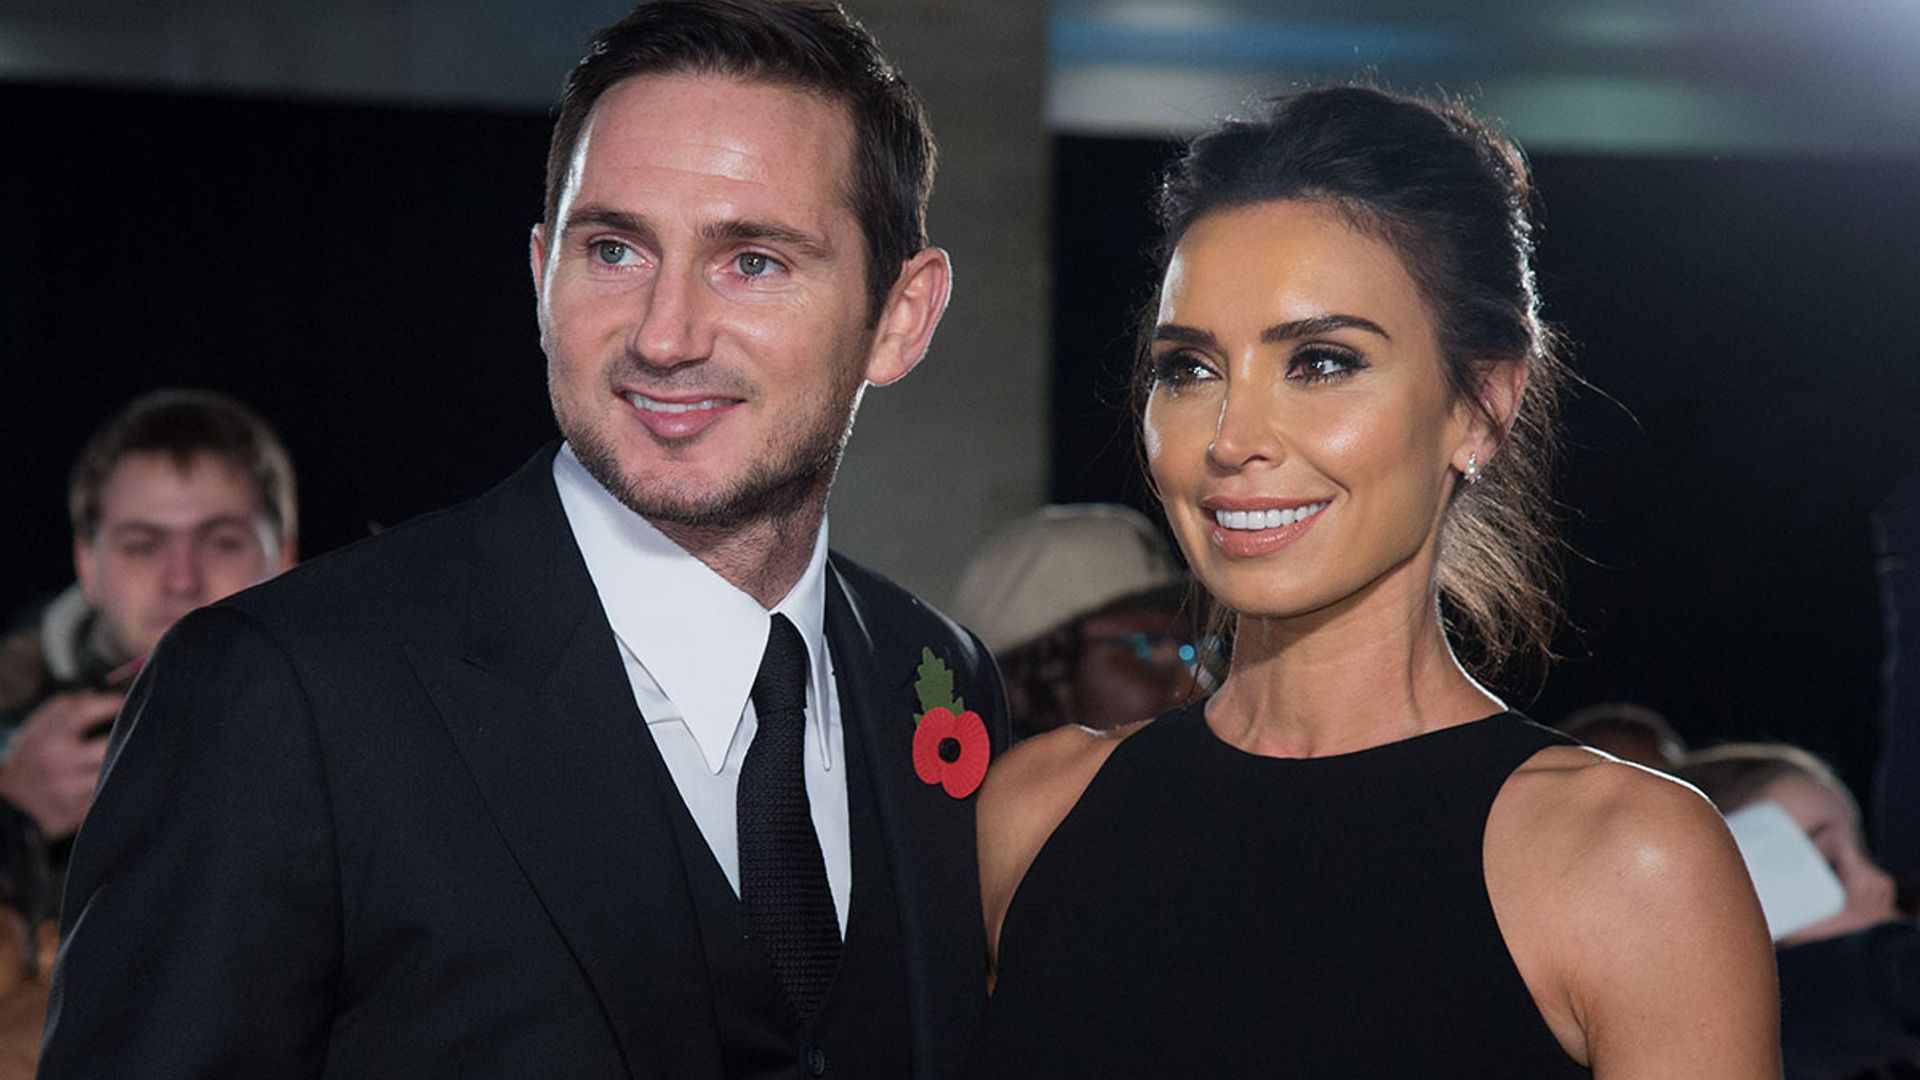 Frank Lampard Shares Rare Picture Of Christine Lampard And Their Baby